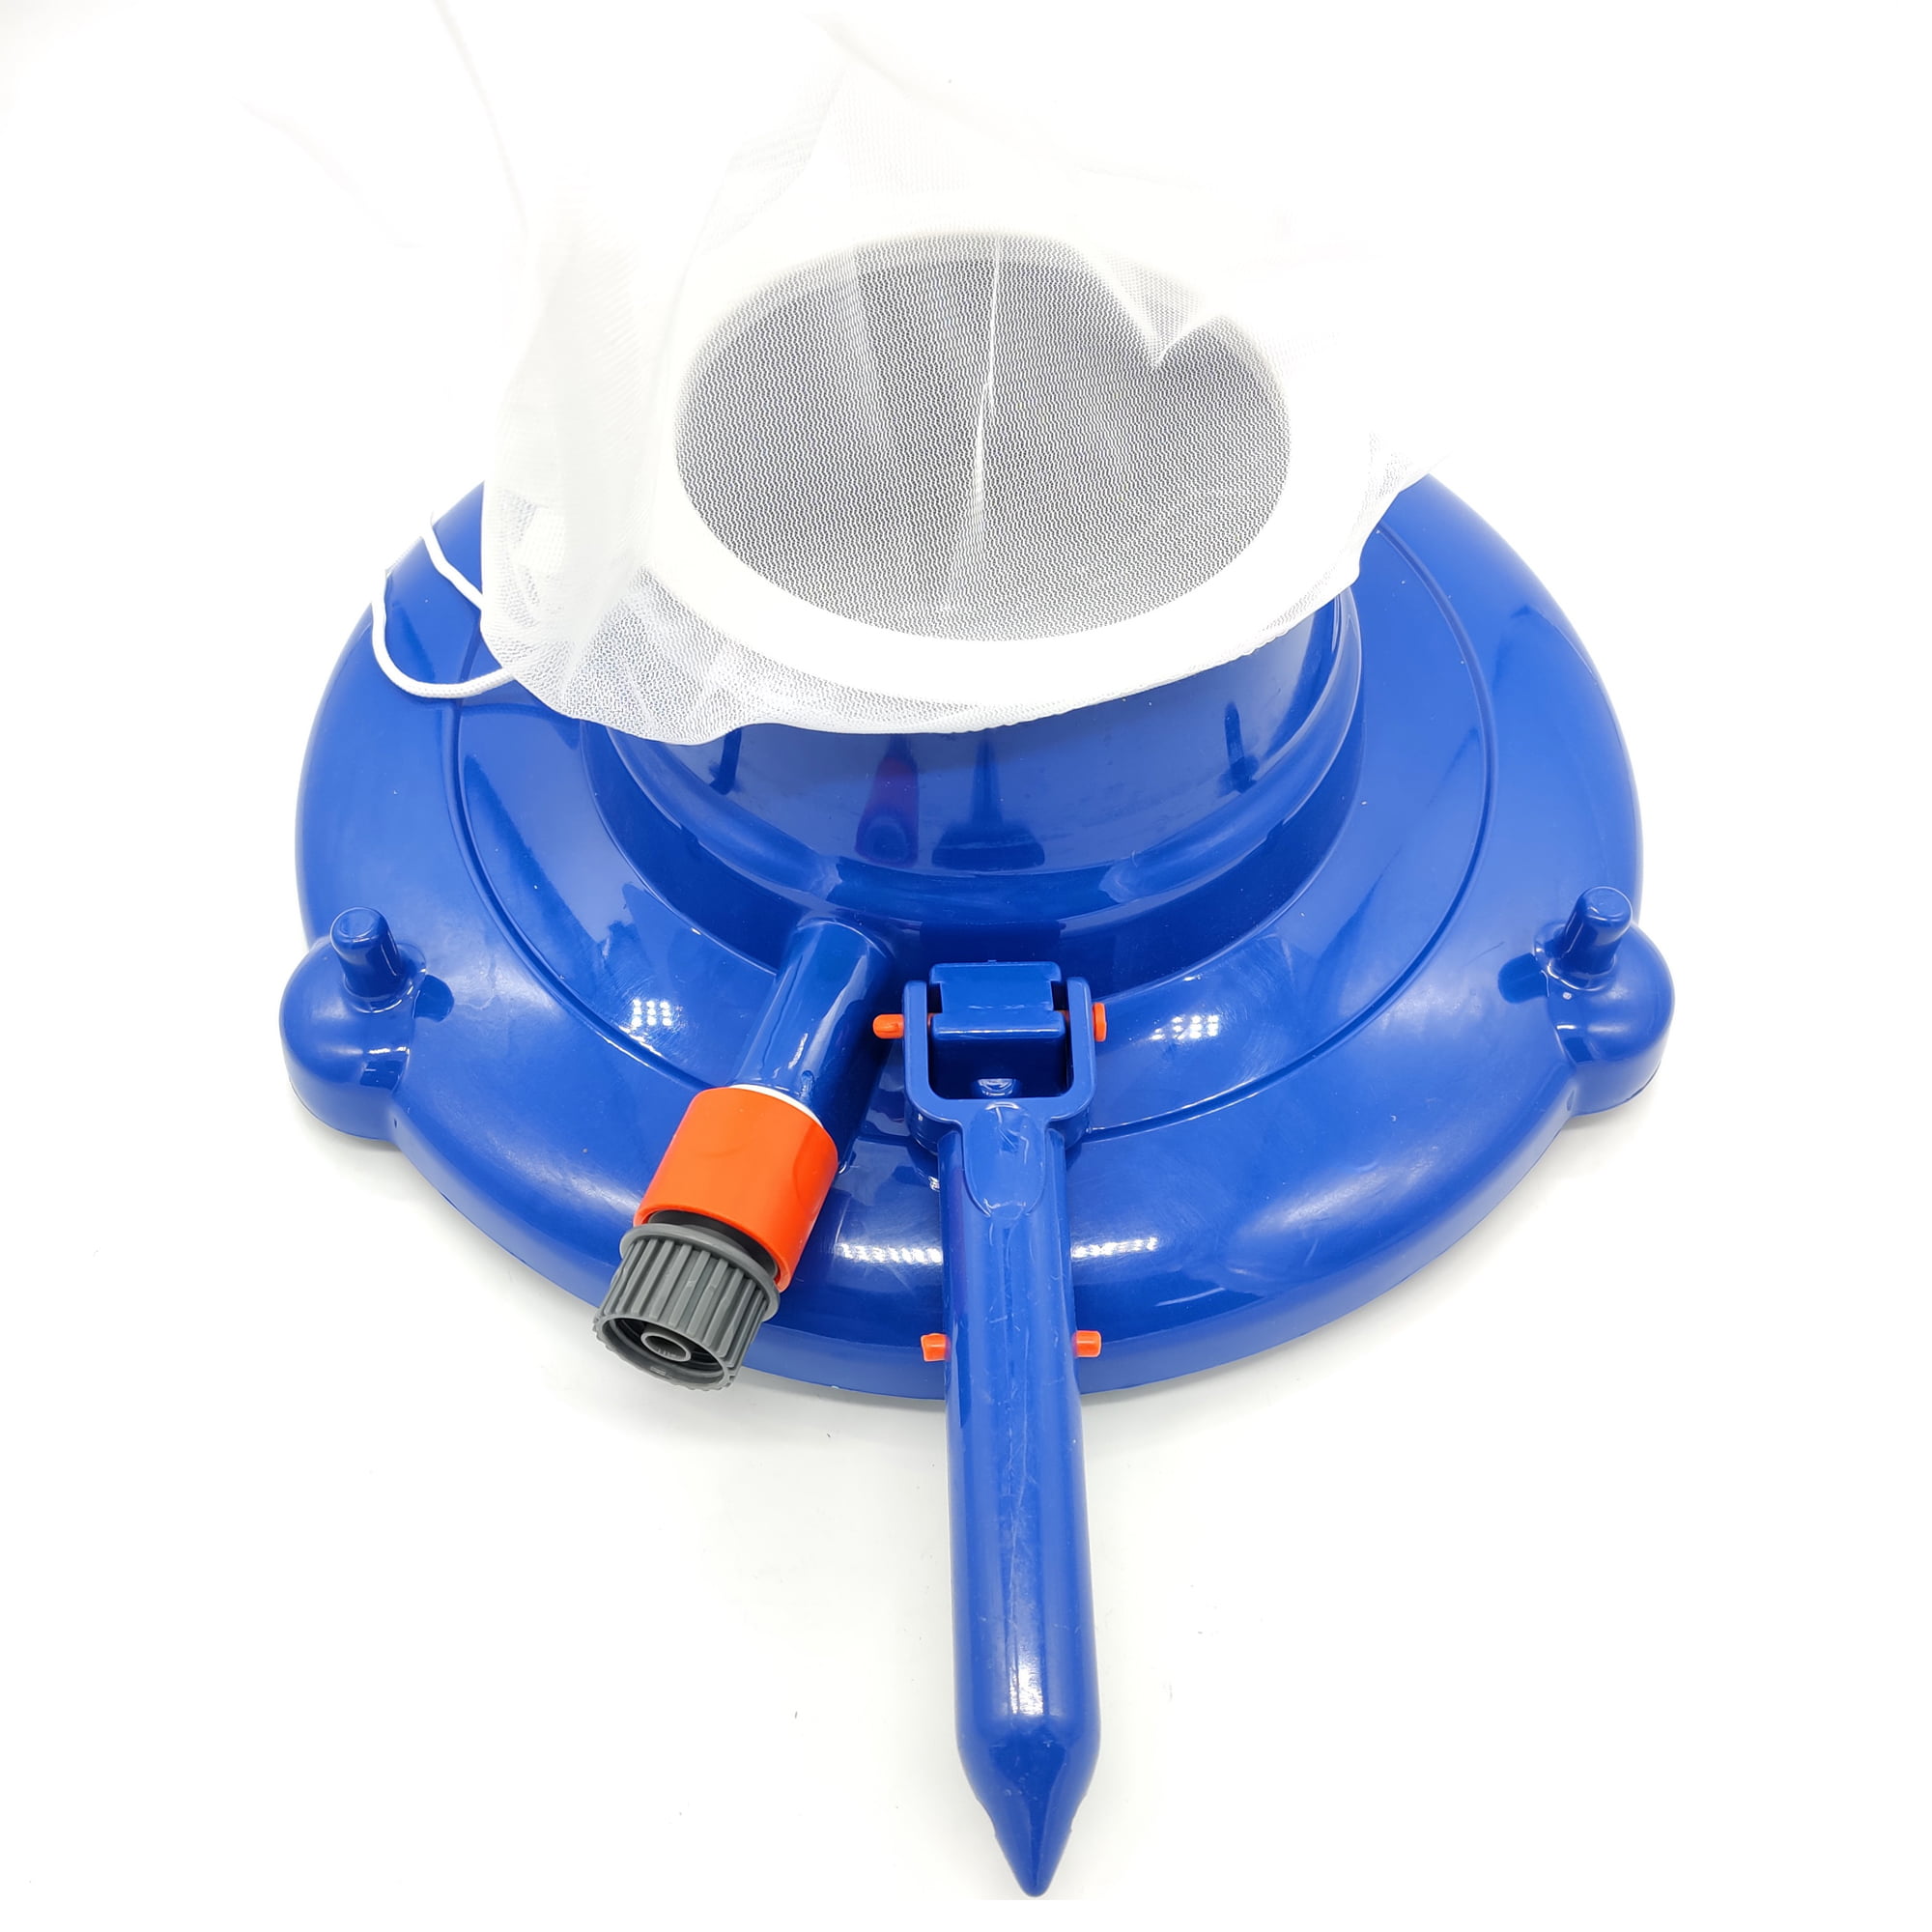 Vacuum Head for Cleaning Above Ground,Leaf，Inground Swimming Pool Corners and Slopes，Quickly Clean Walls，Swimming Pool Quick Cleaning Pool Bottom Leaves Collection Pool Accessory